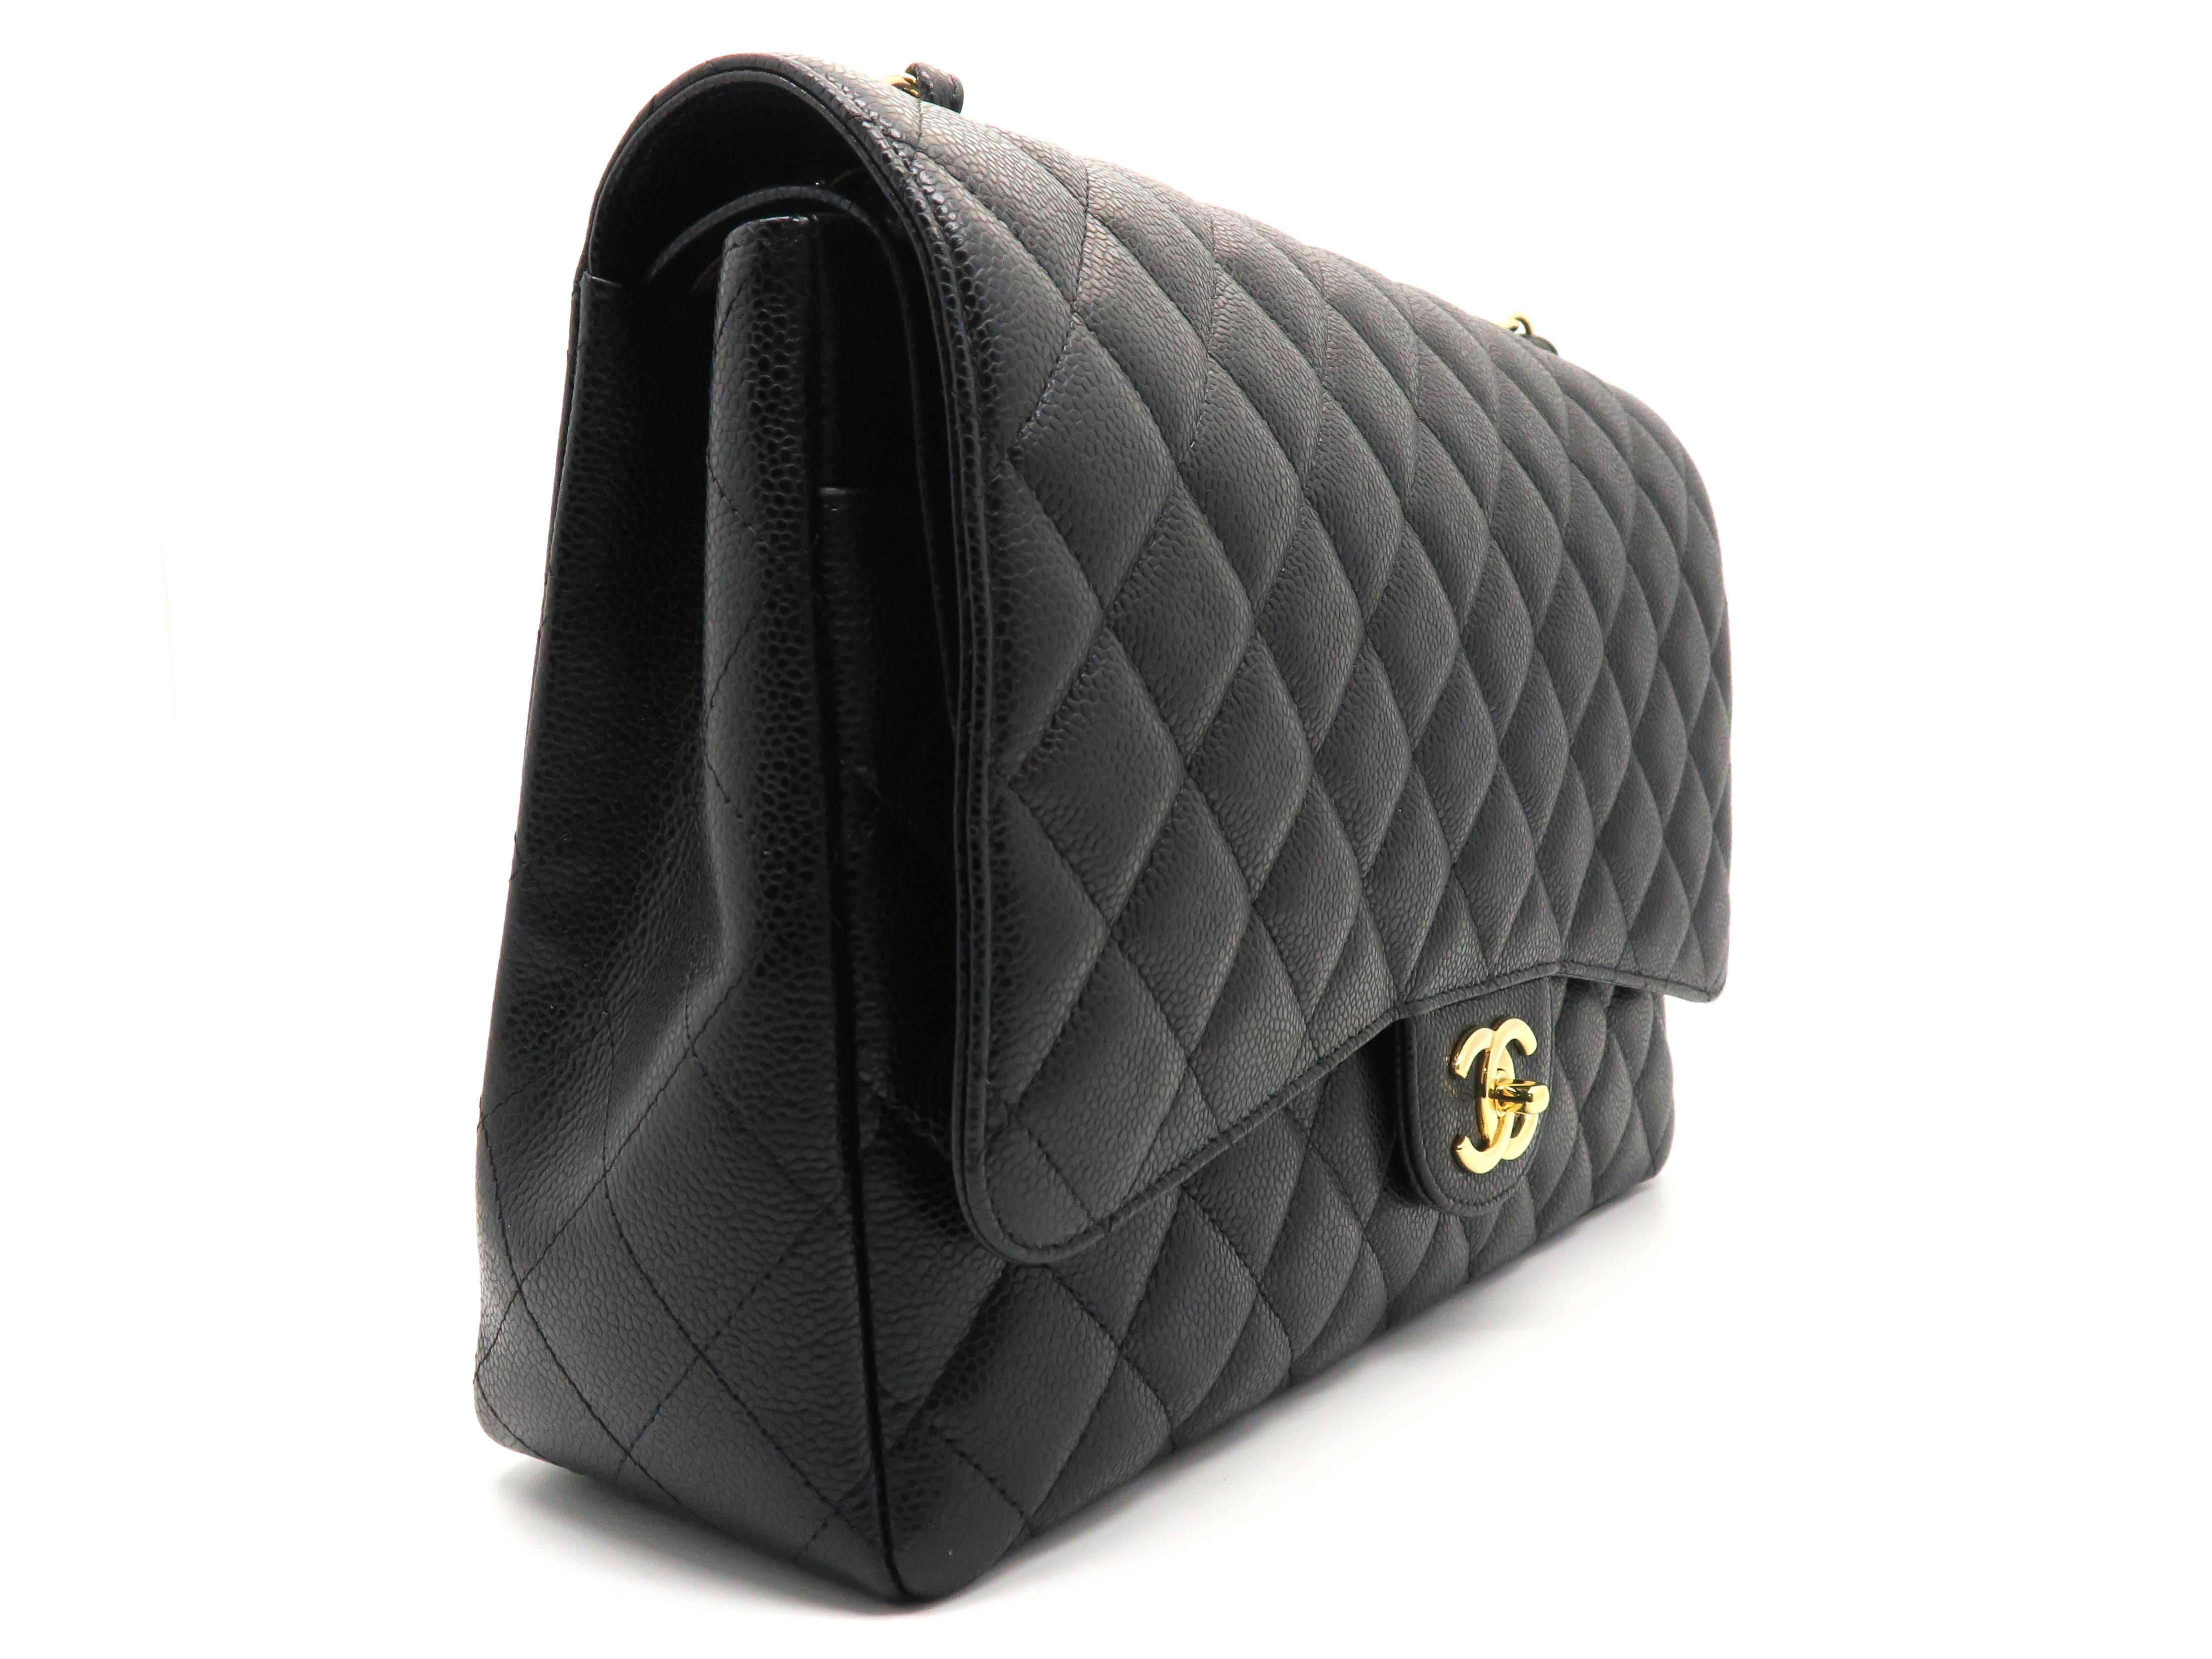 Color: Black

Material: Caviar Leather

Condition: Rank S
Overall: Almost New
Surface:Minor Scratches 
Corners: Good
Edges: Minor Scratches 
Handles/Straps: Minor Scratches 
Hardware: Good

Dimensions: W34 × H22 × D10cm（W13.3" × H8.6" ×